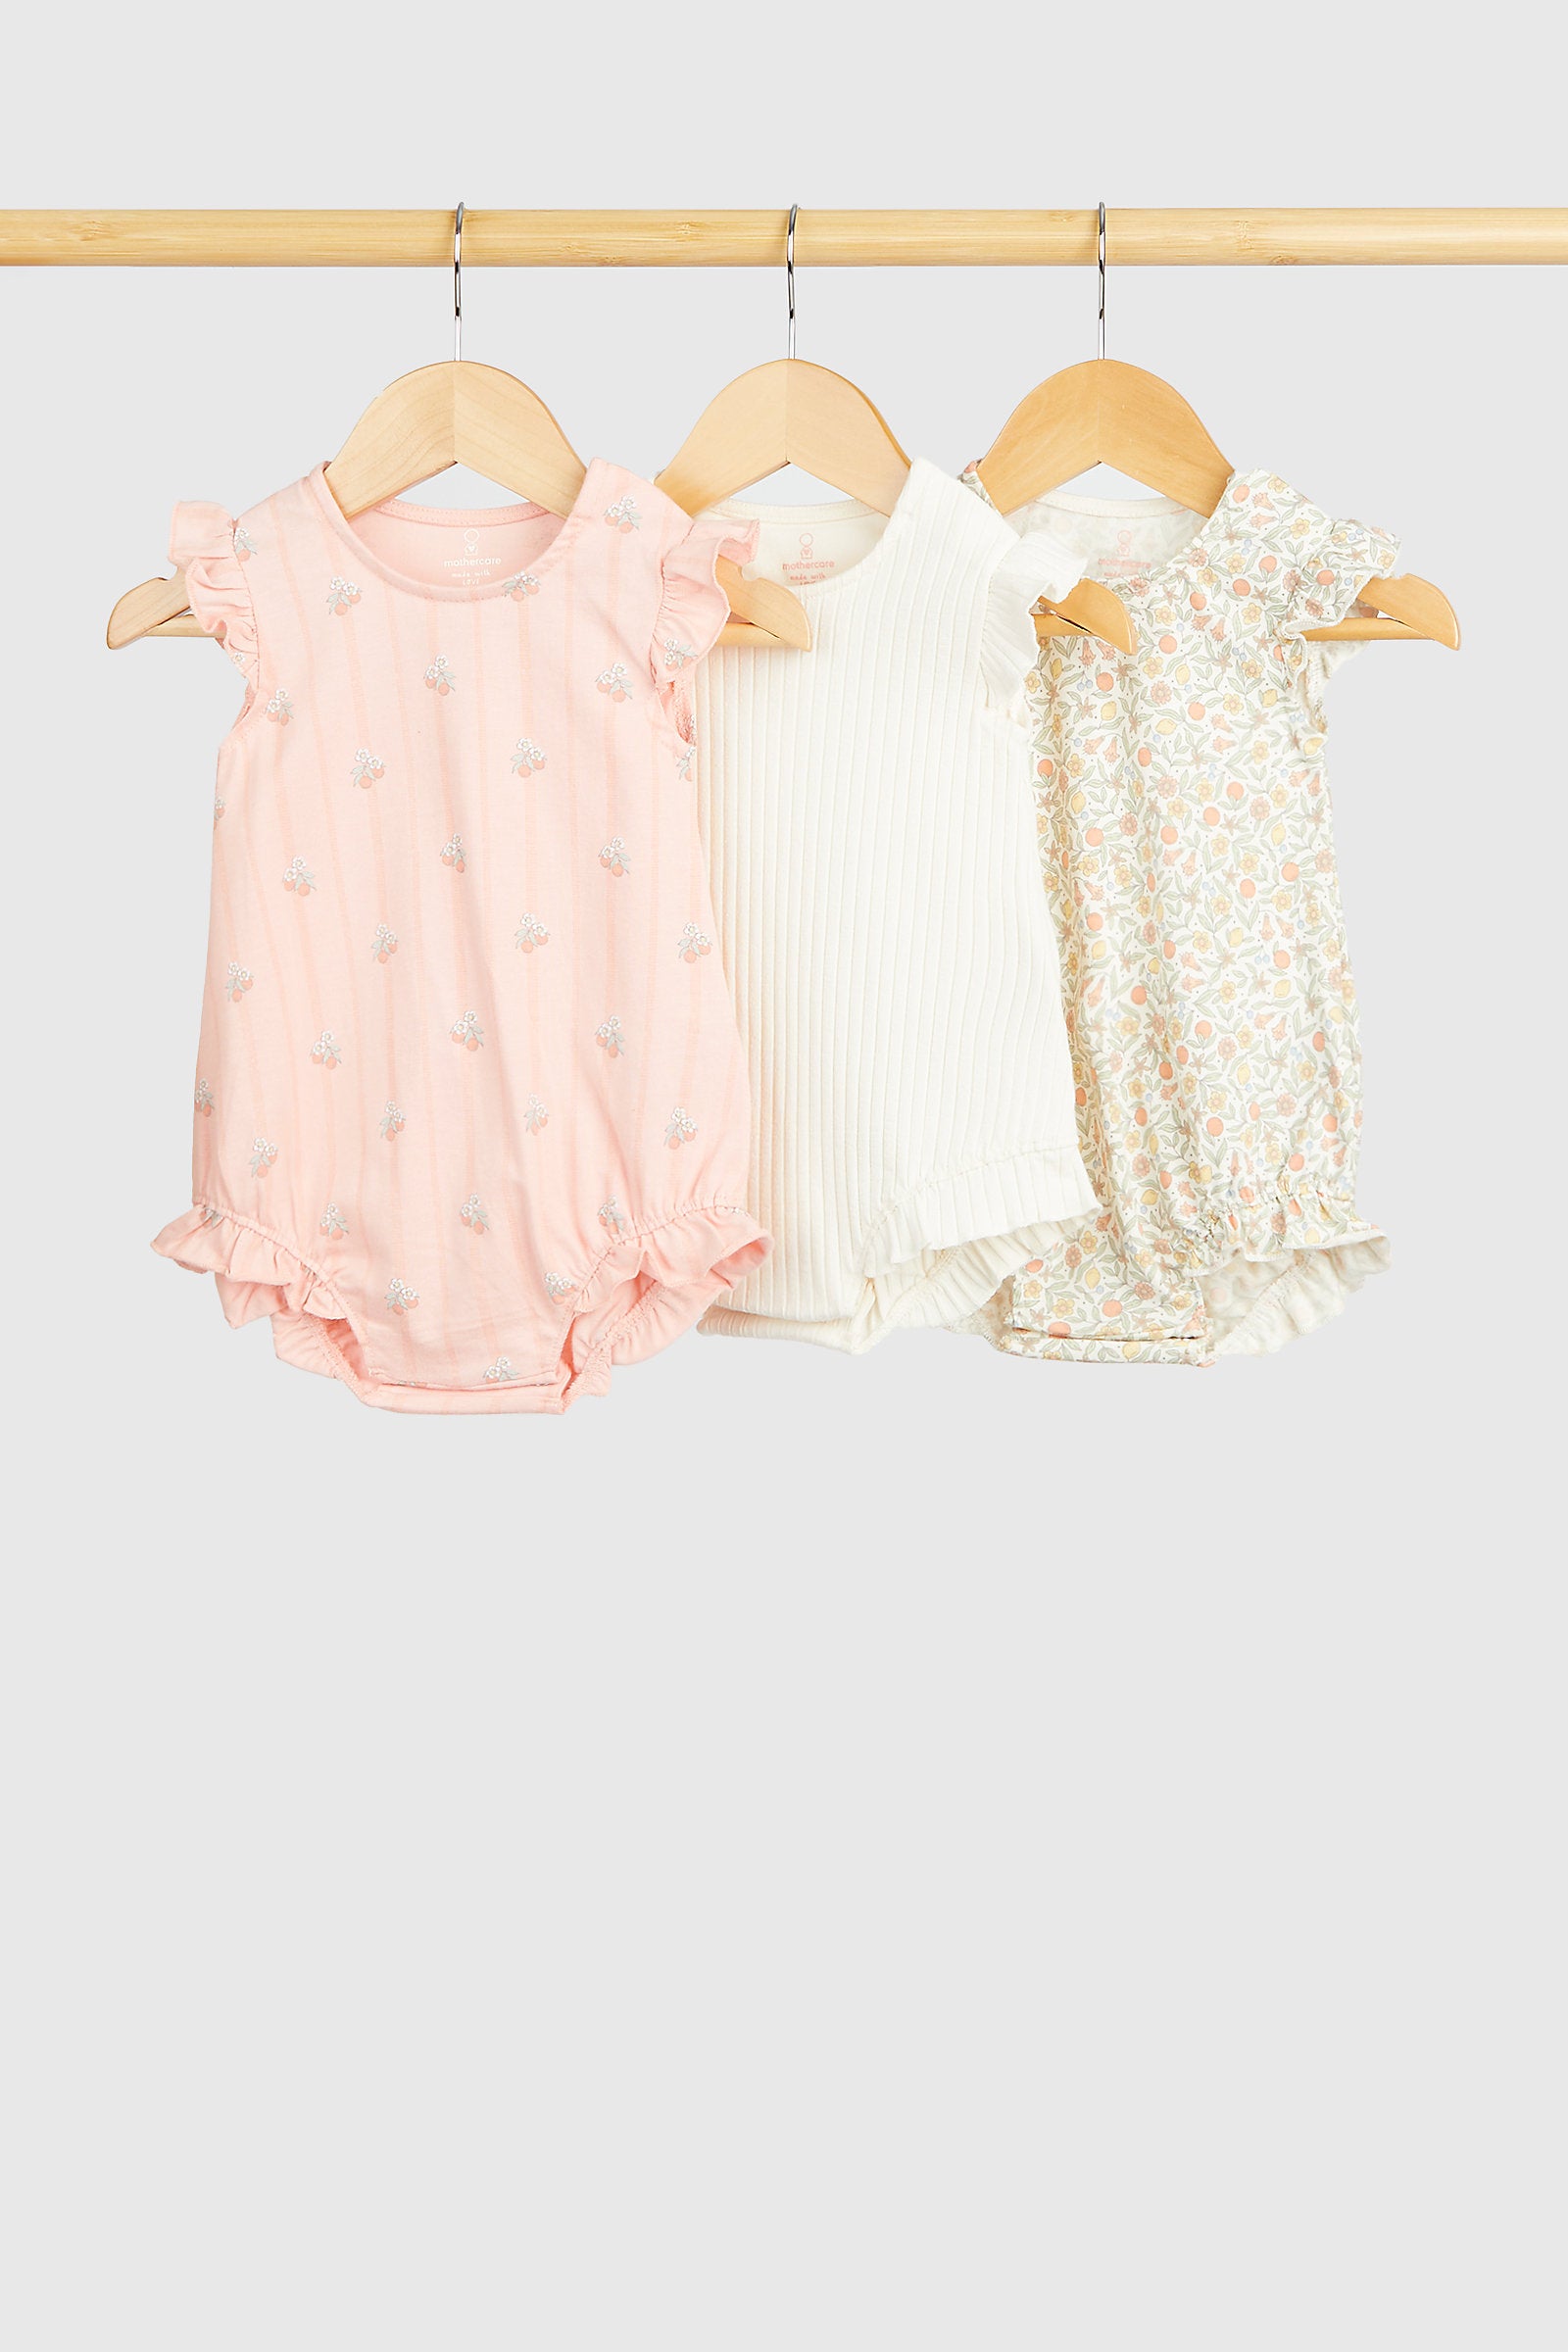 Mothercare Orchard Rompers - 3 Pack